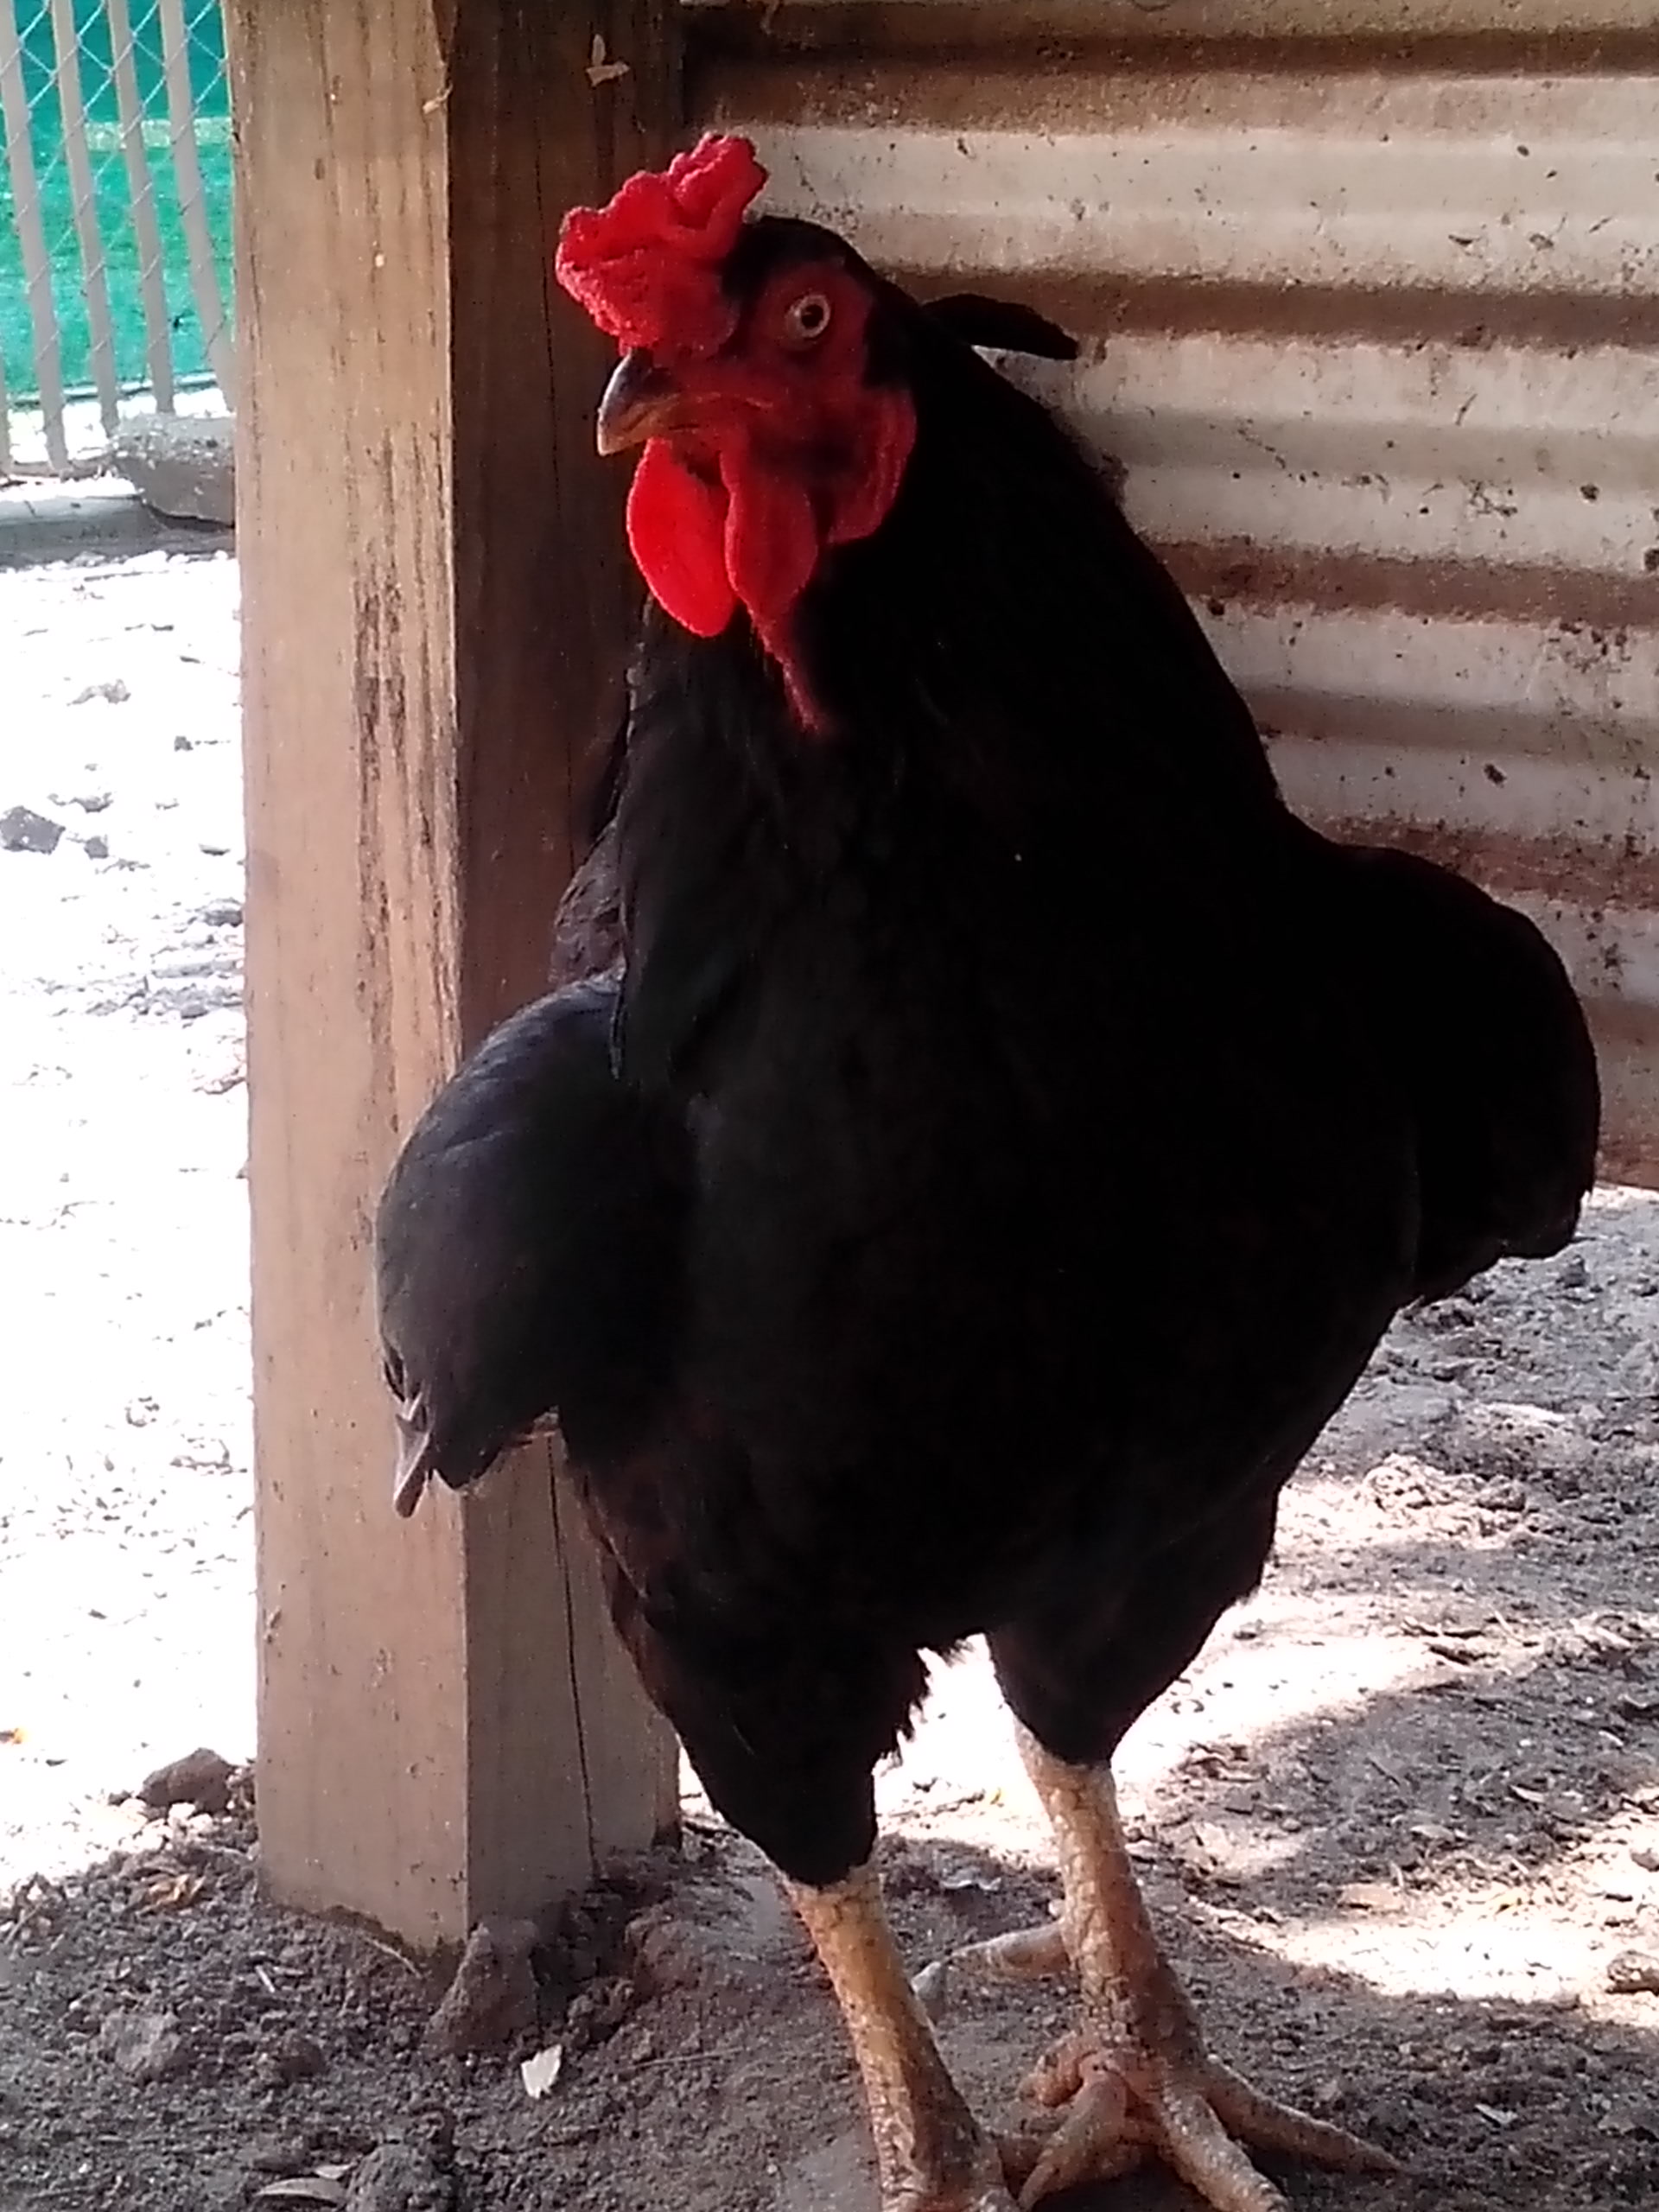 Dark Cornish rooster,1 year old Pretty Boy getting ready to attack!